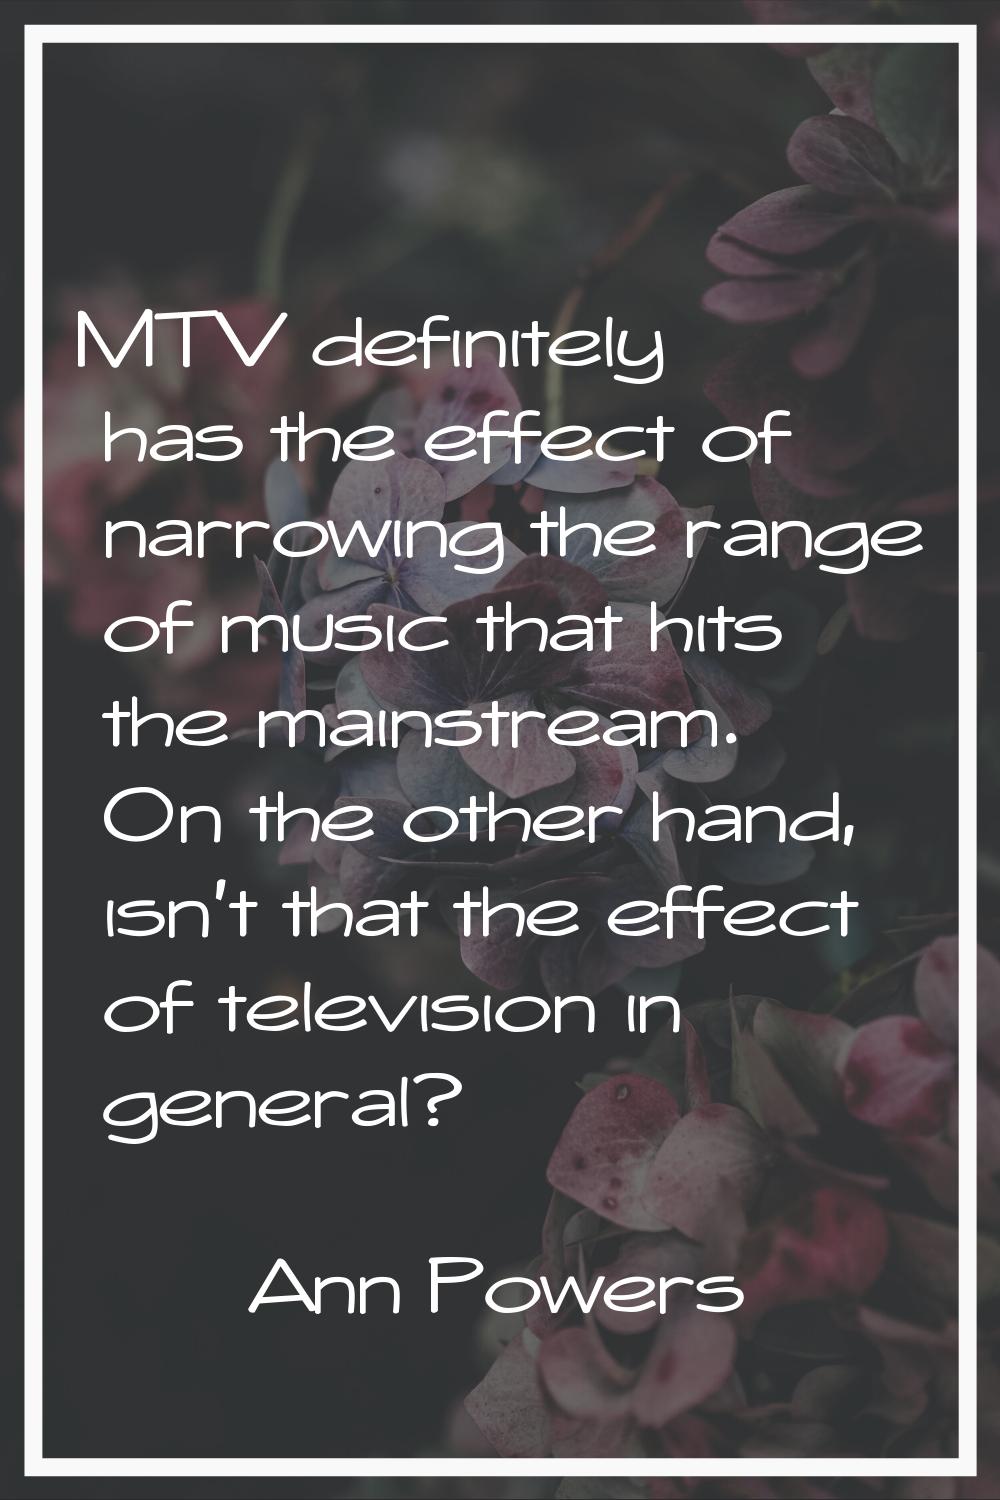 MTV definitely has the effect of narrowing the range of music that hits the mainstream. On the othe